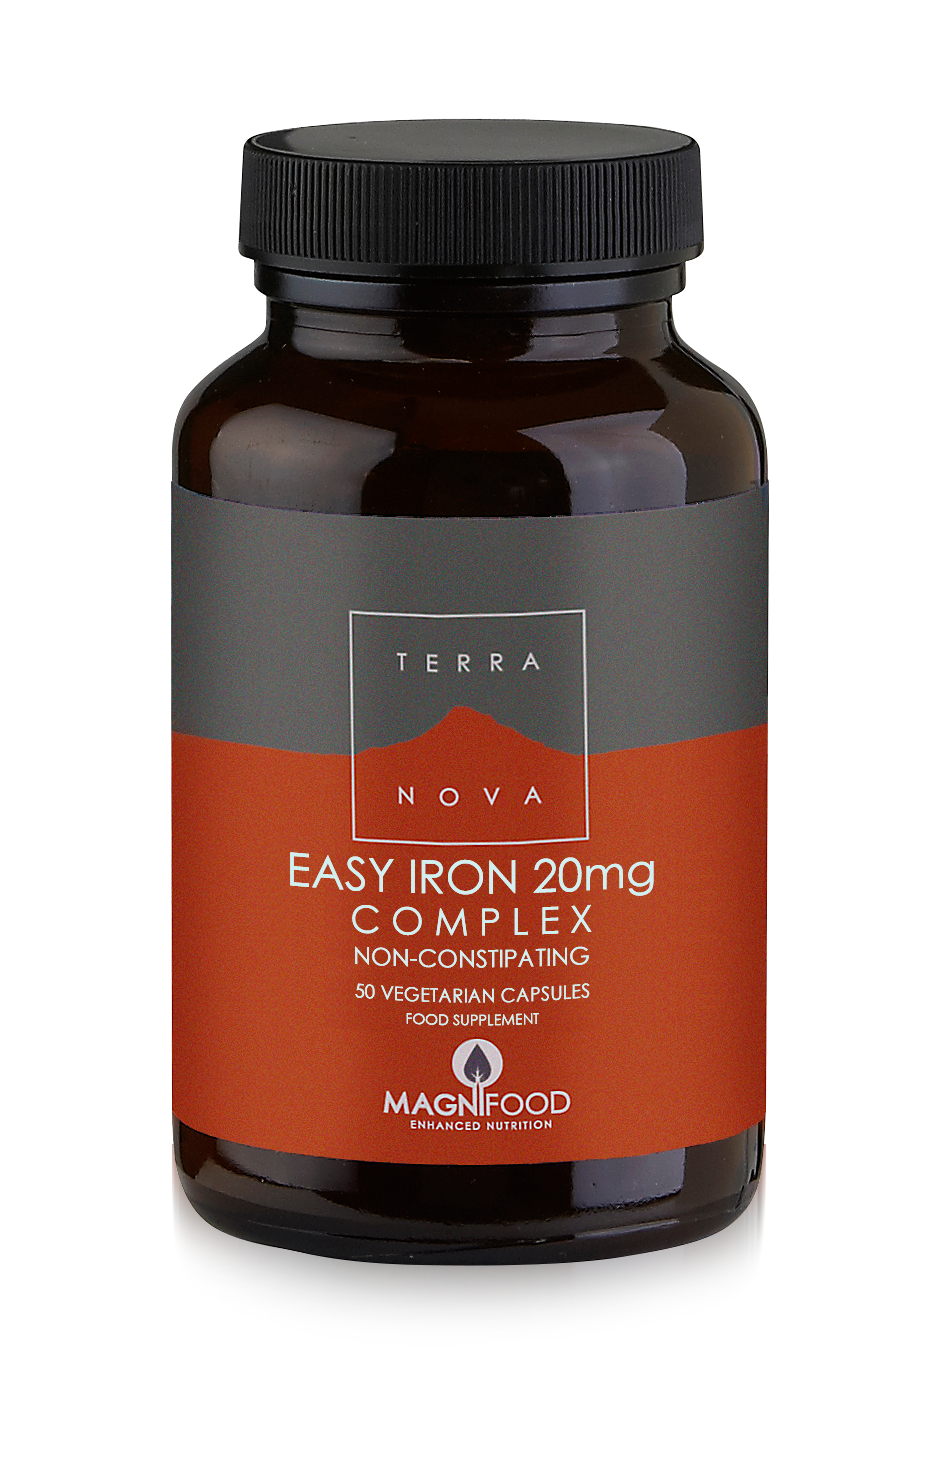 EASY IRON 20mg COMPLEX 50